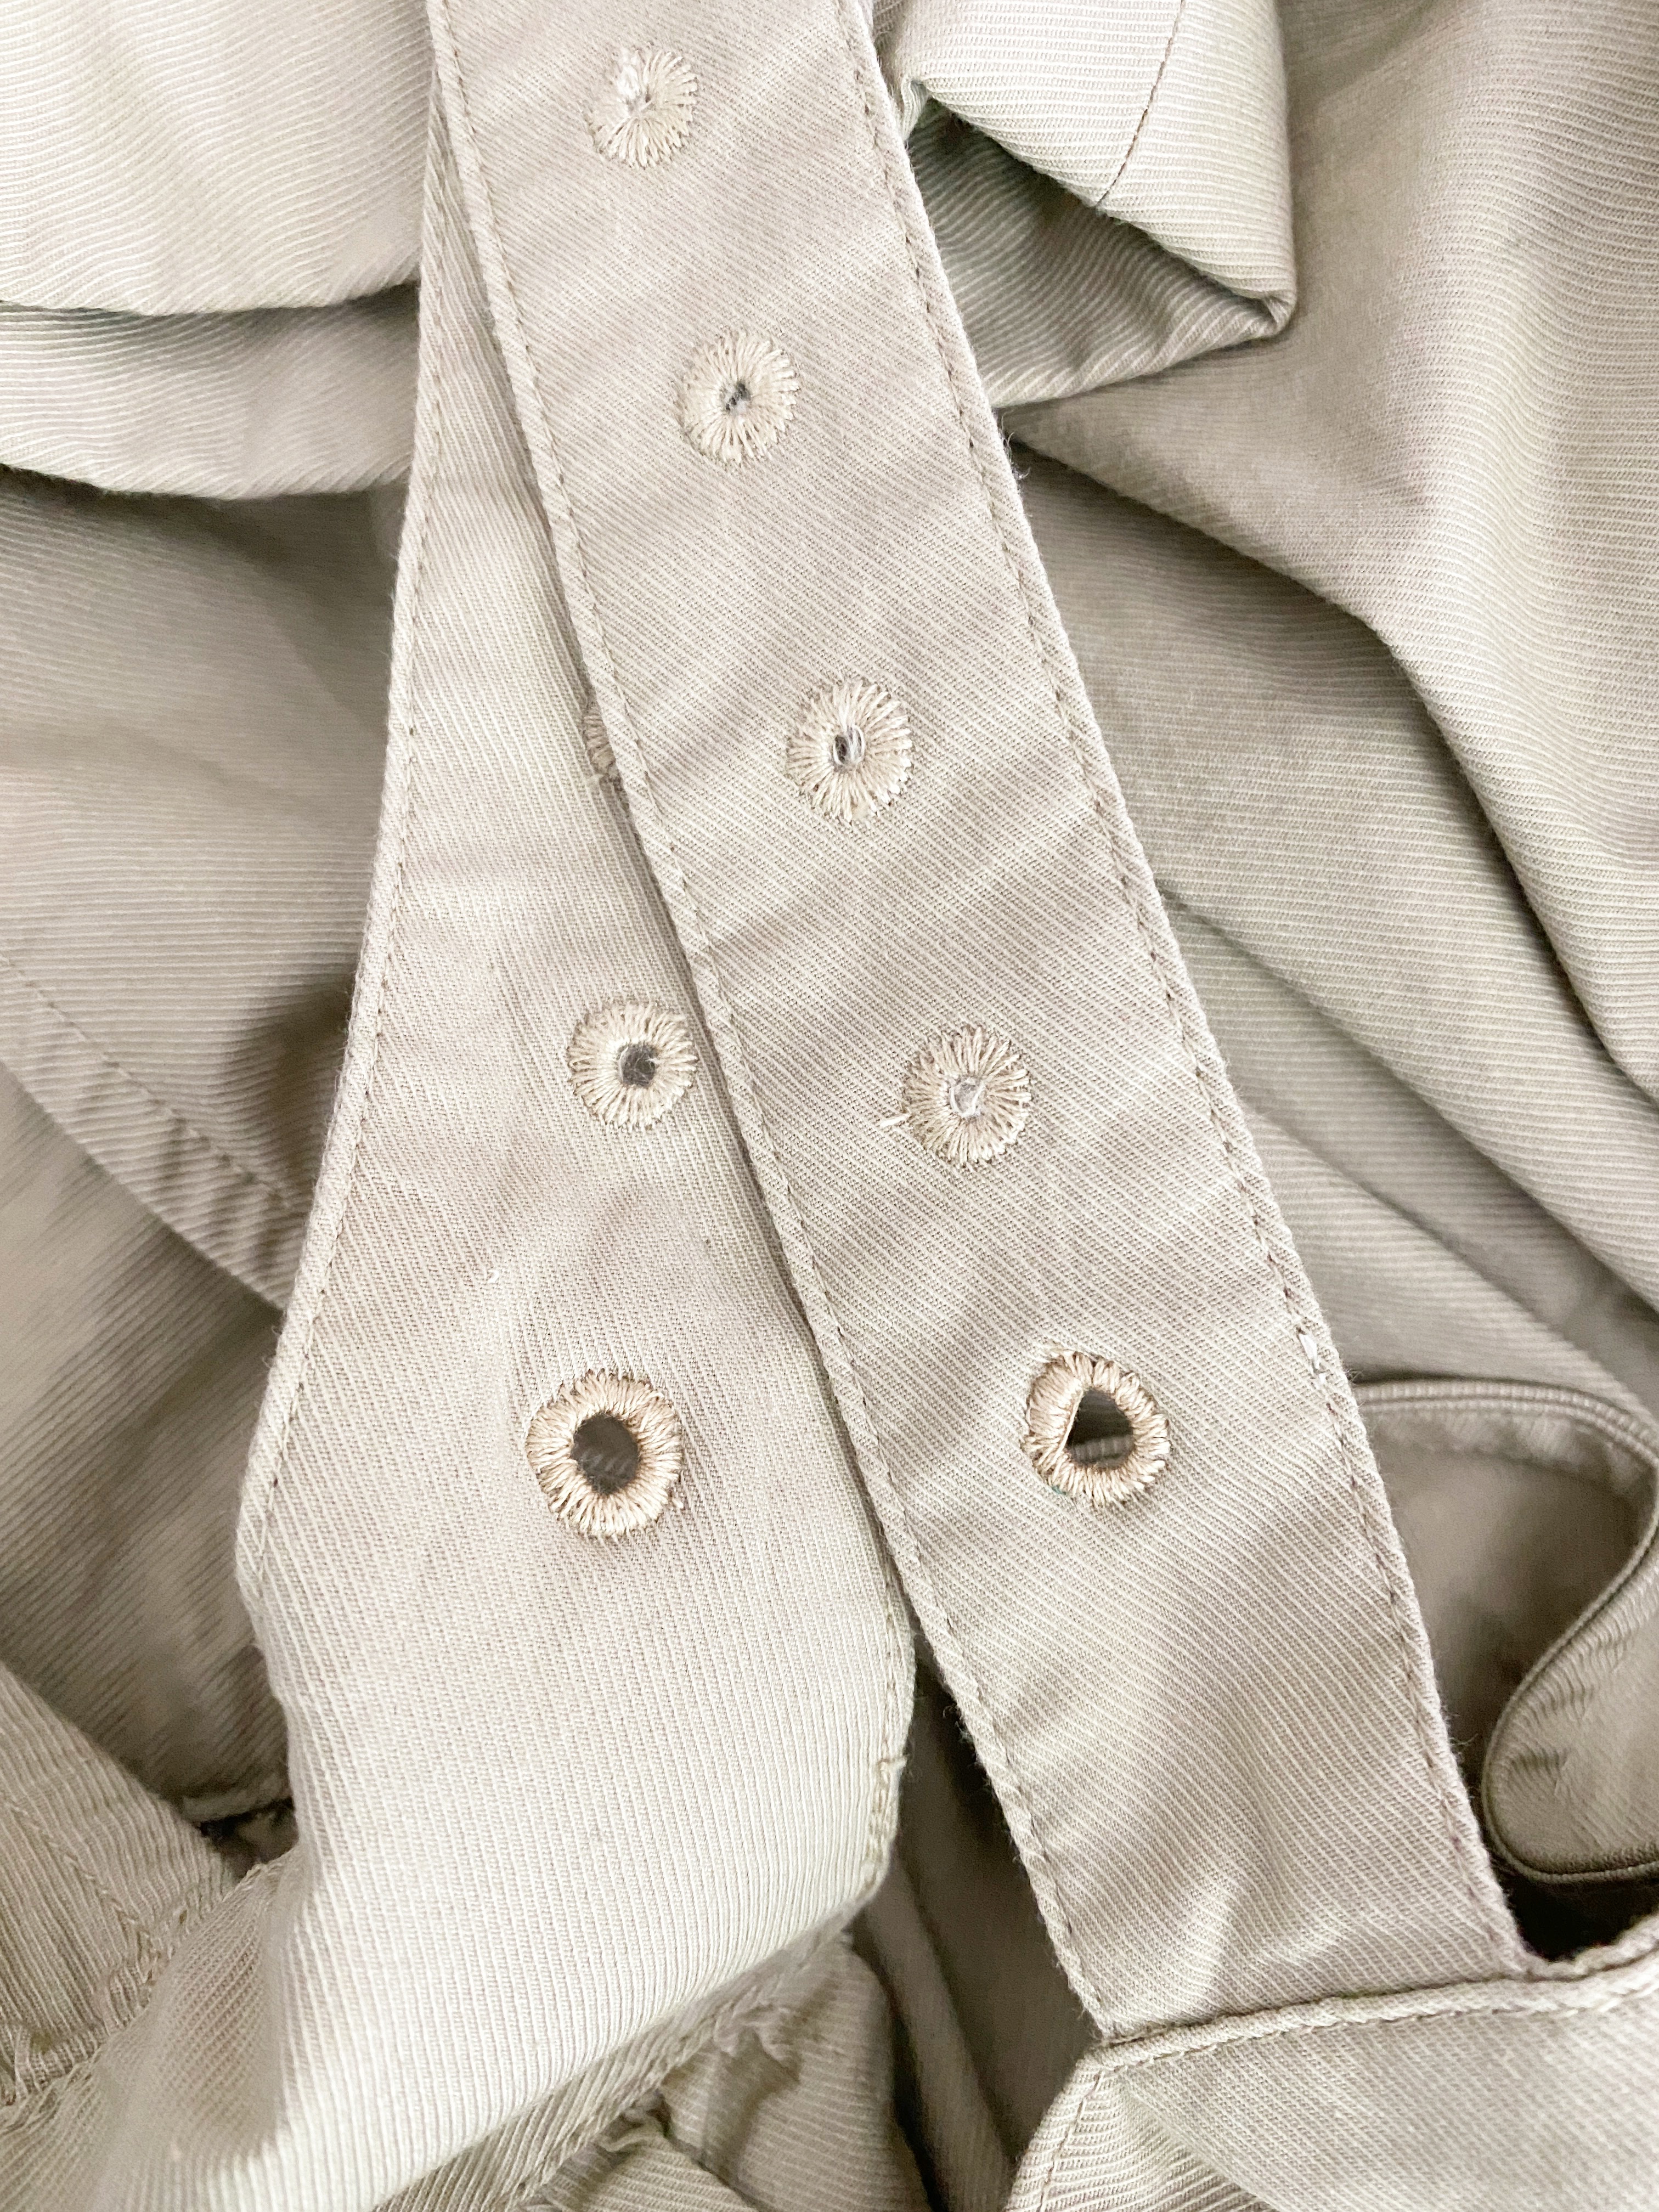 How To Add An Eyelet To Ready-Made Garment: After amending